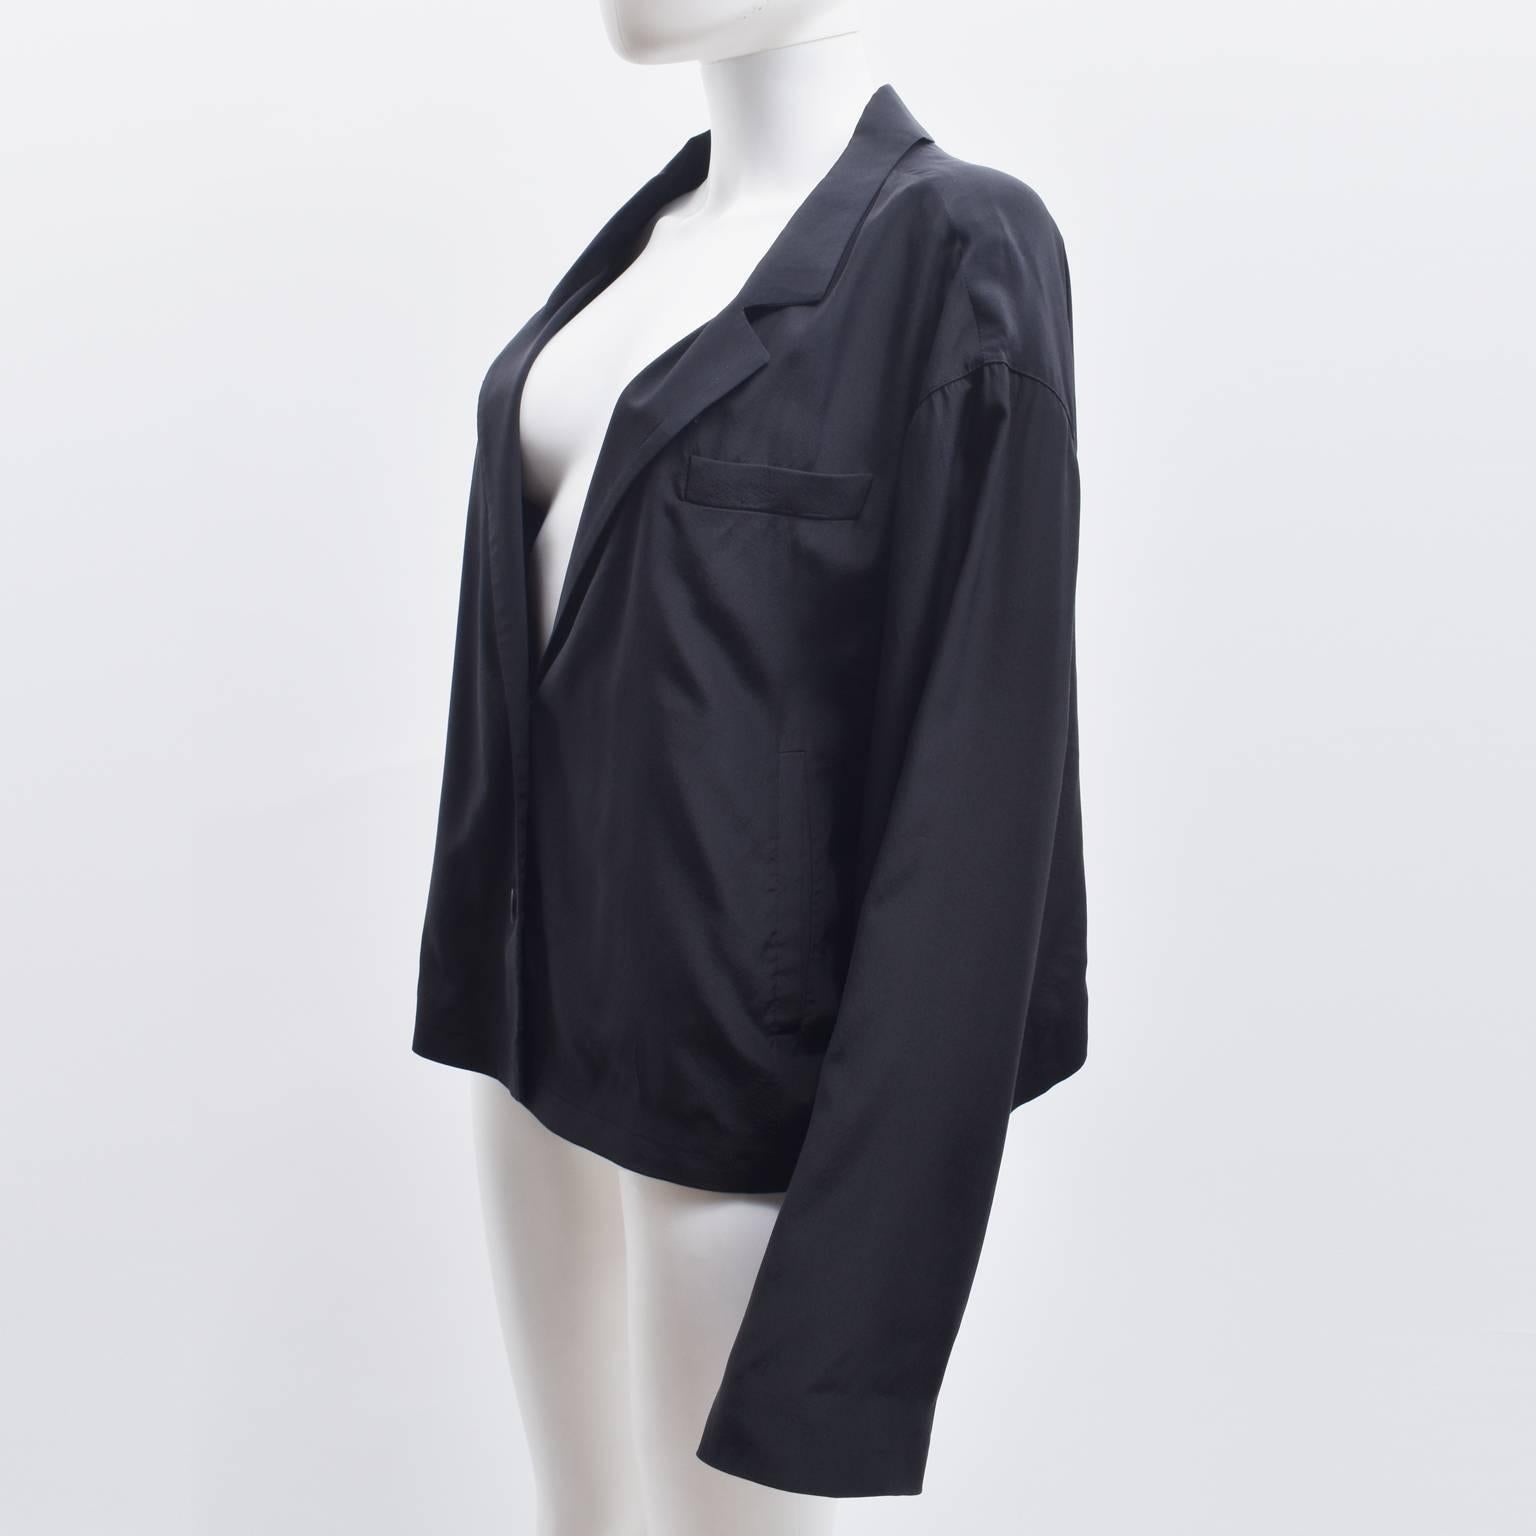 An elegant black silk jacket from Prada. The jacket has a boxy, cropped, oversized shape that is a contemporary twist on a classic garment. It is made from 100% Silk and is extremely light in texture and style. It is in excellent condition. 